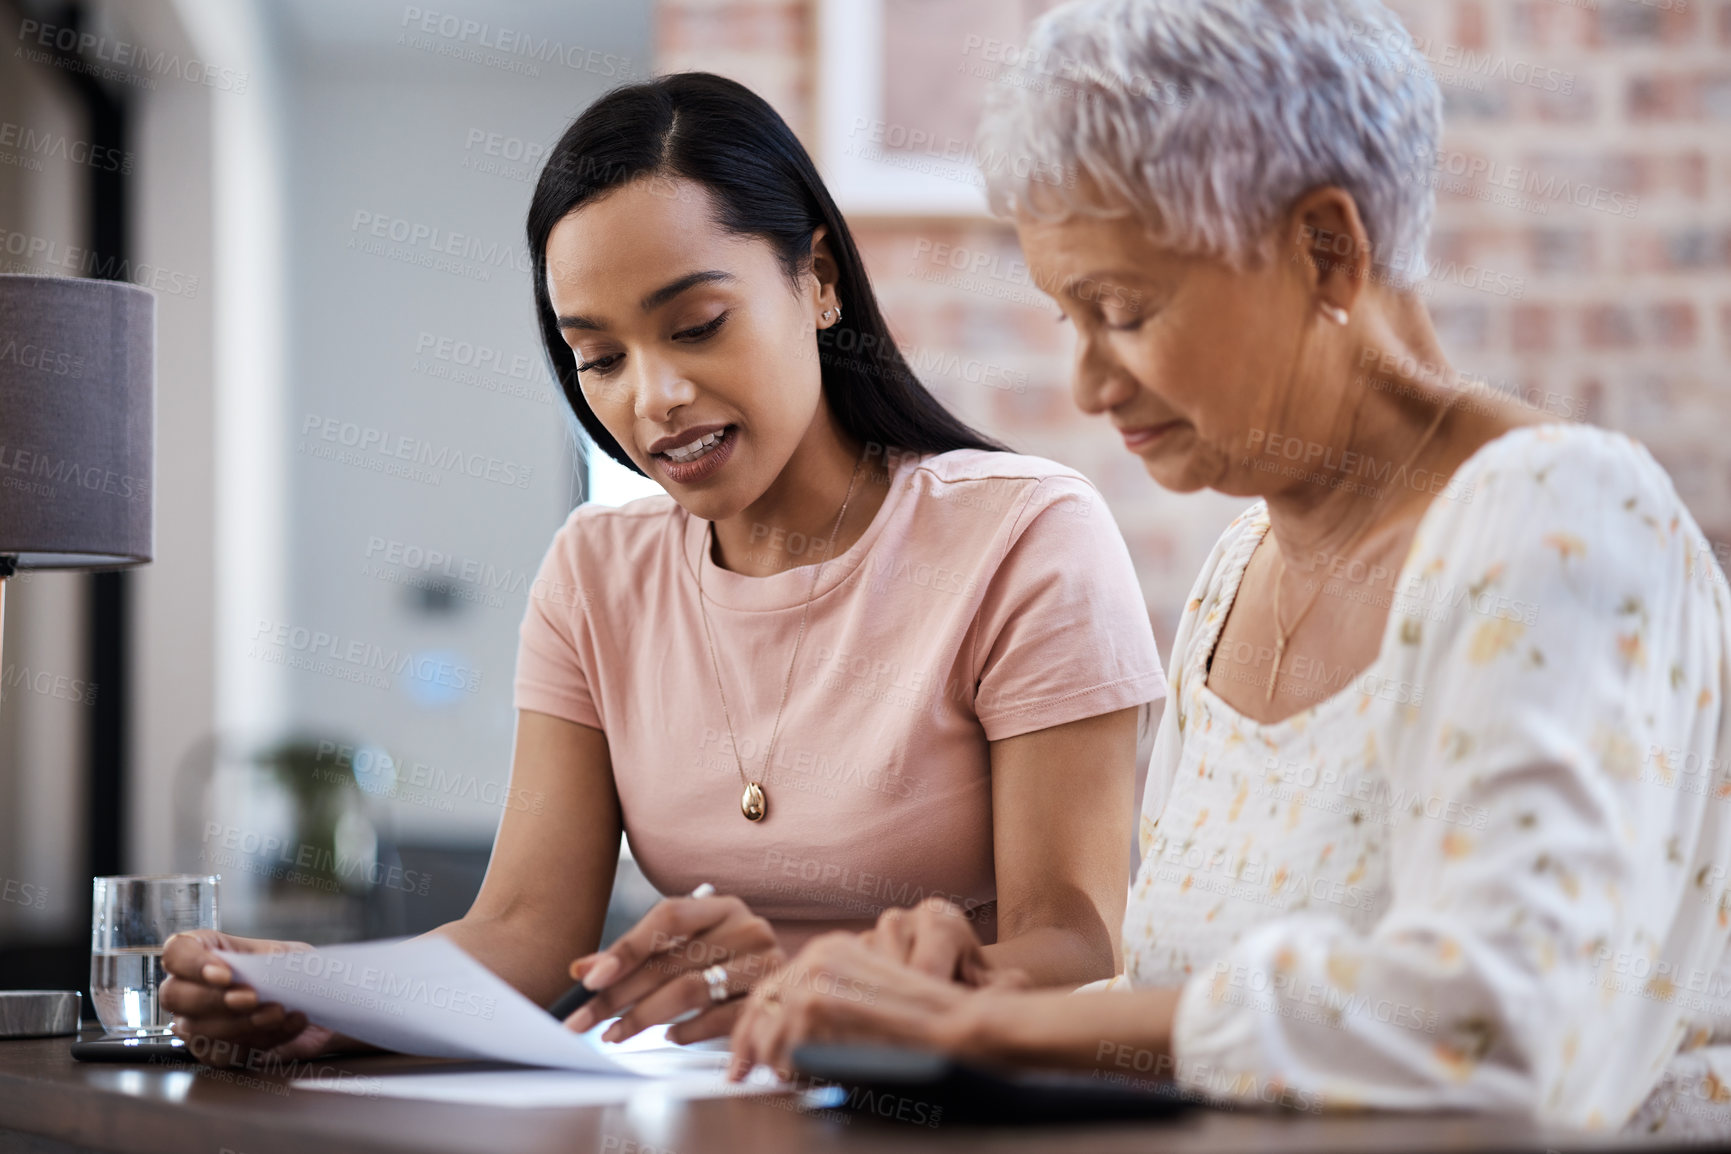 Buy stock photo Shot of a young woman going over paperwork with her elderly mother at home